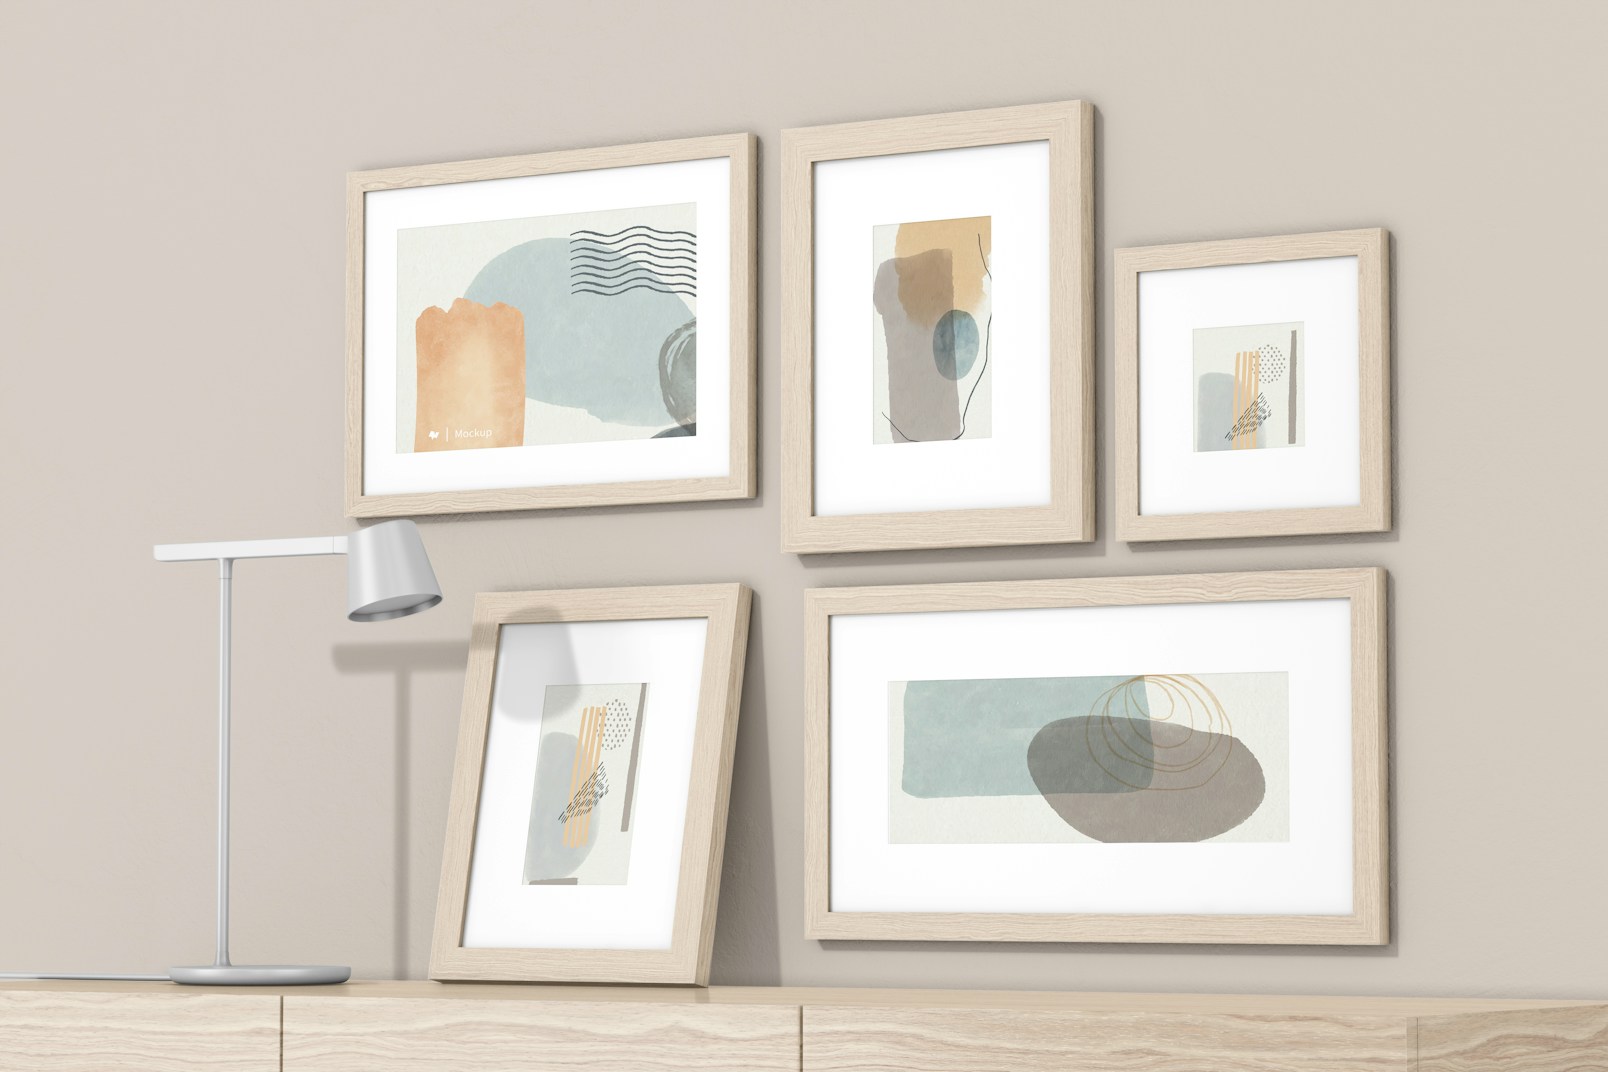 Gallery Frames with Table Lamp Mockup